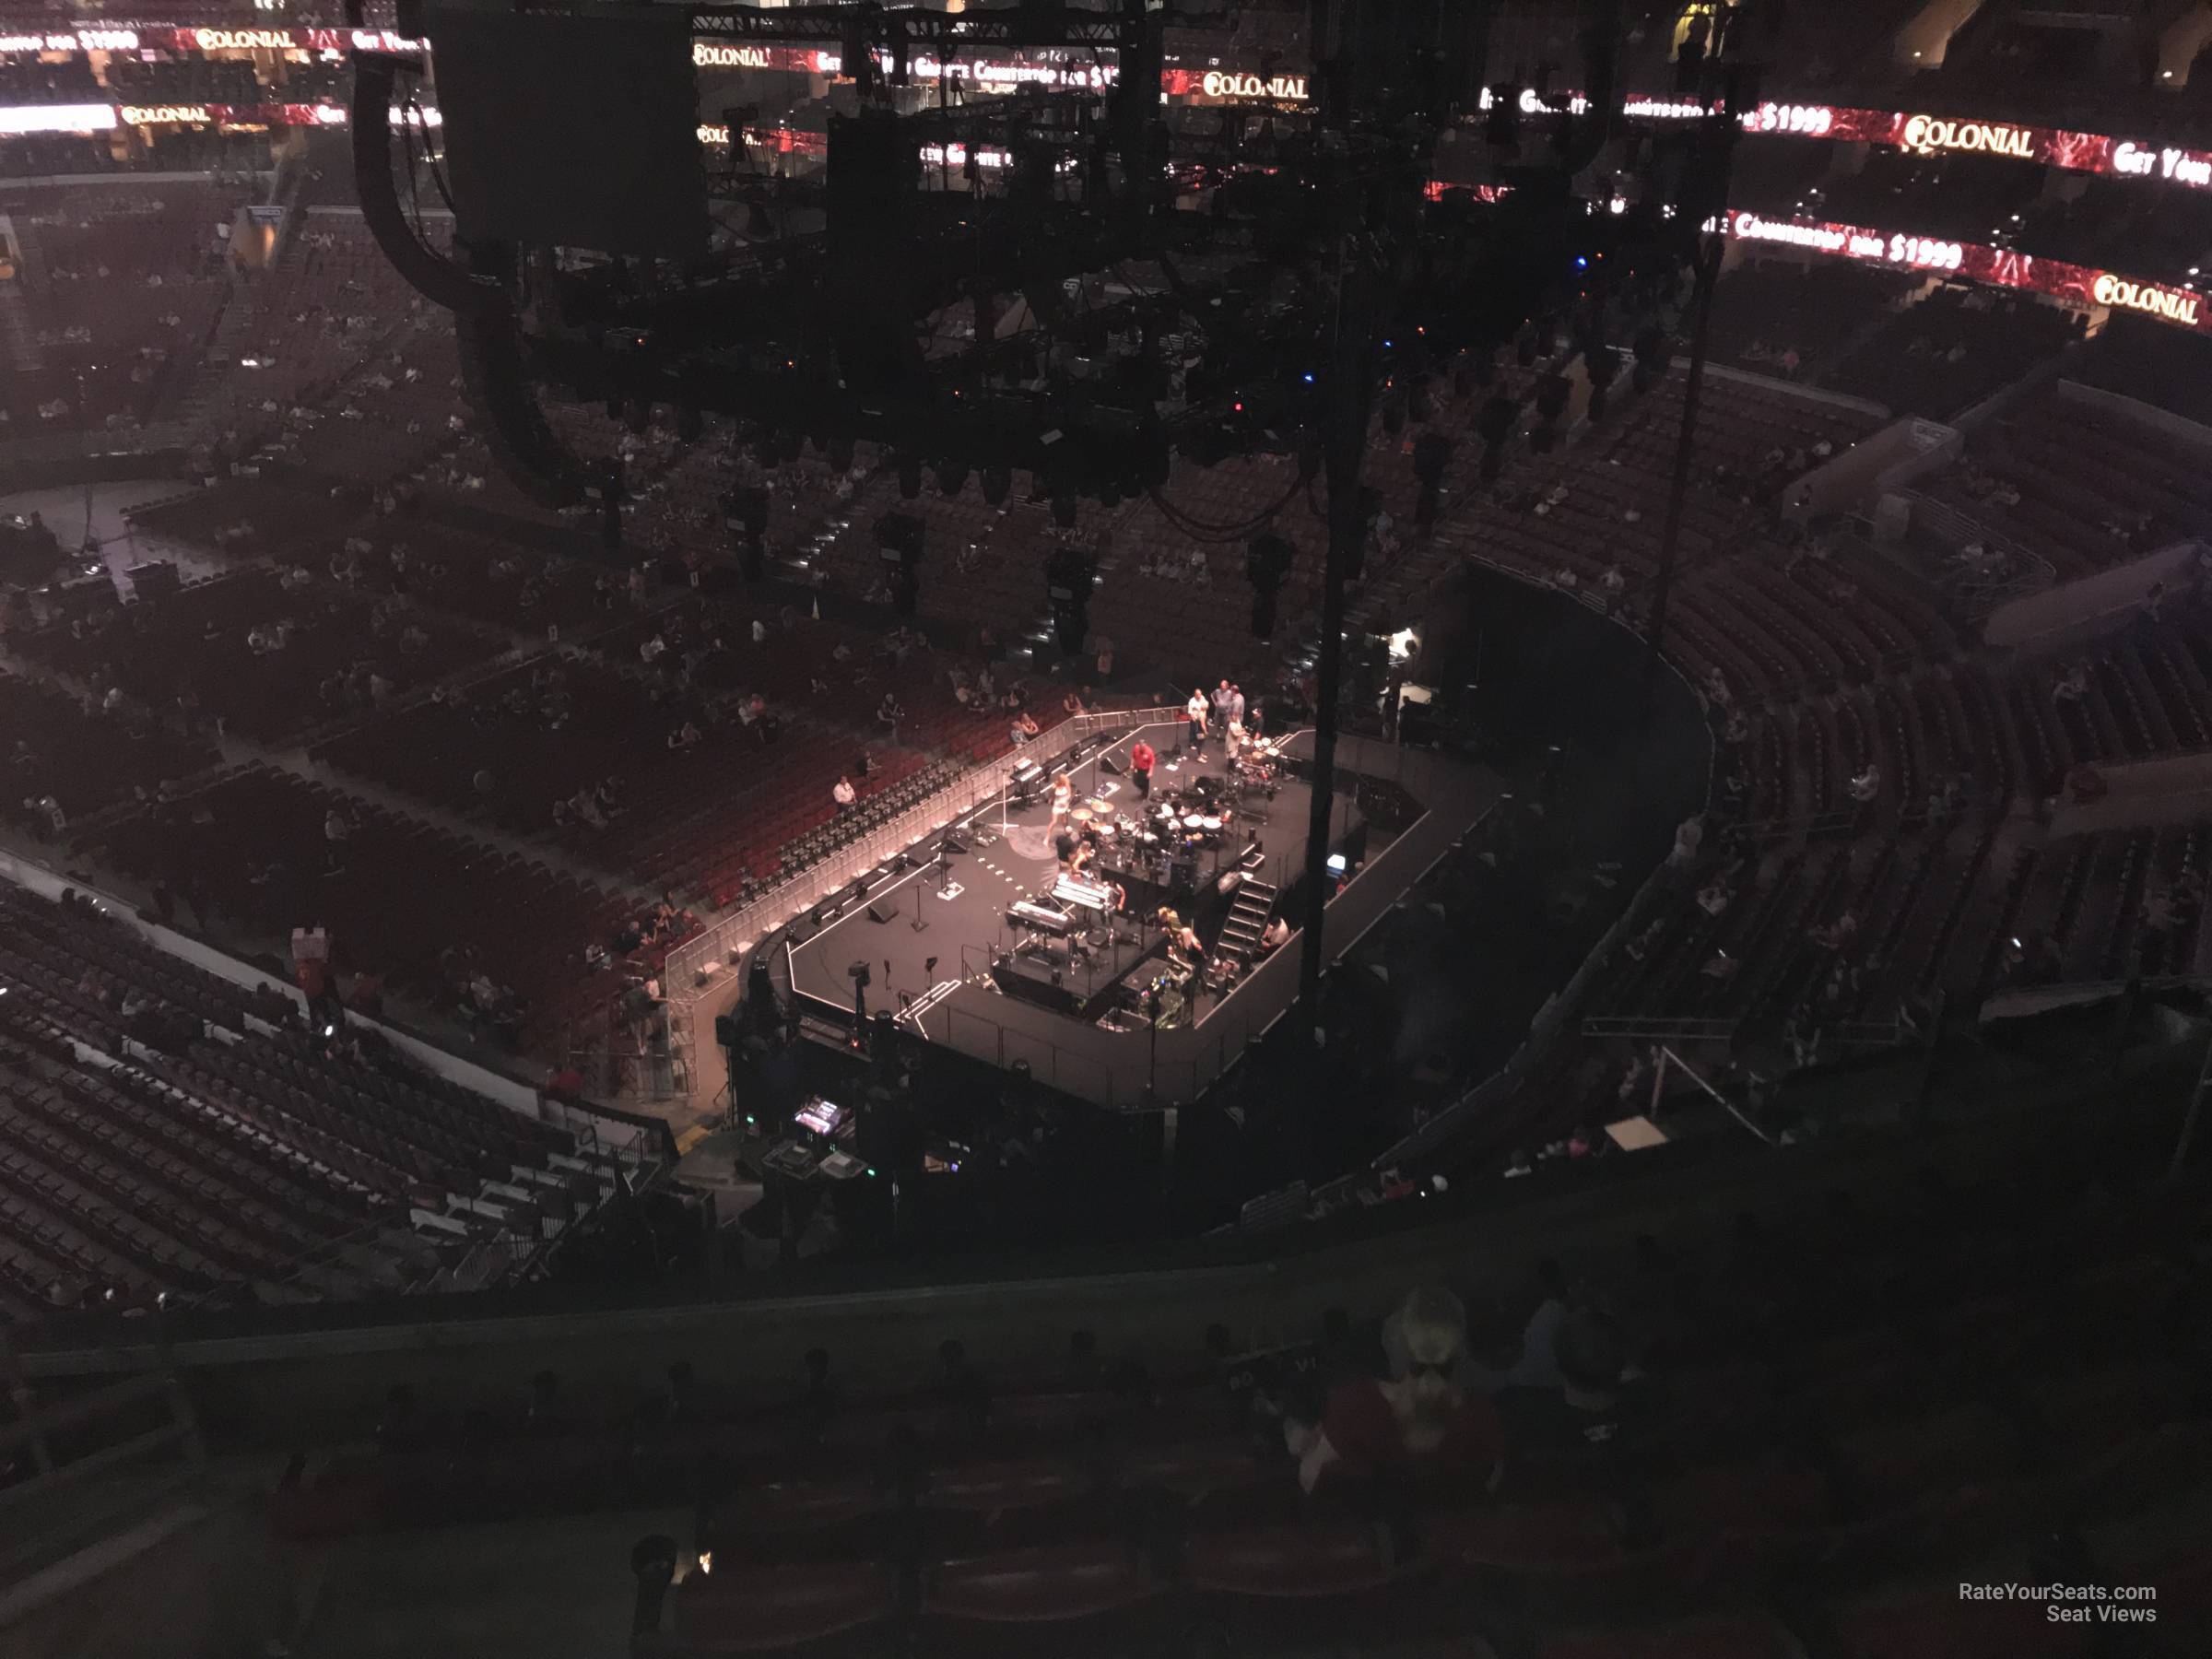 section 216a, row 7 seat view  for concert - wells fargo center